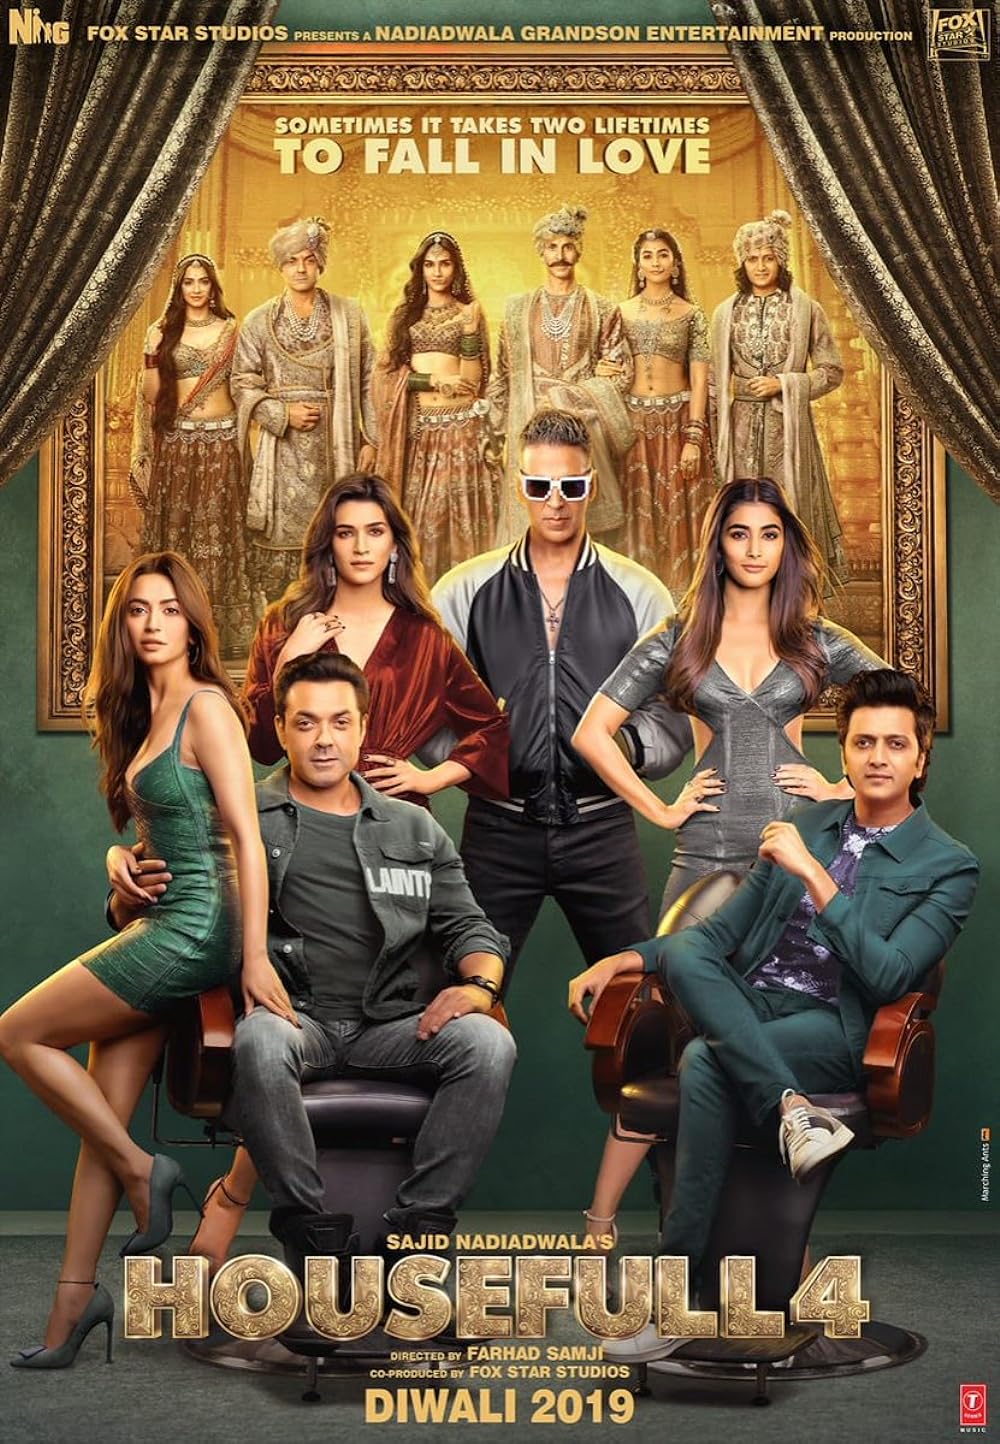 Housefull 4 (2019) offers Kriti Sanon in a hilarious comedy of errors alongside an ensemble cast, directed by Farhad Samji. This film takes the audience on a rib-tickling journey of reincarnation, mistaken identities, and uproarious chaos.